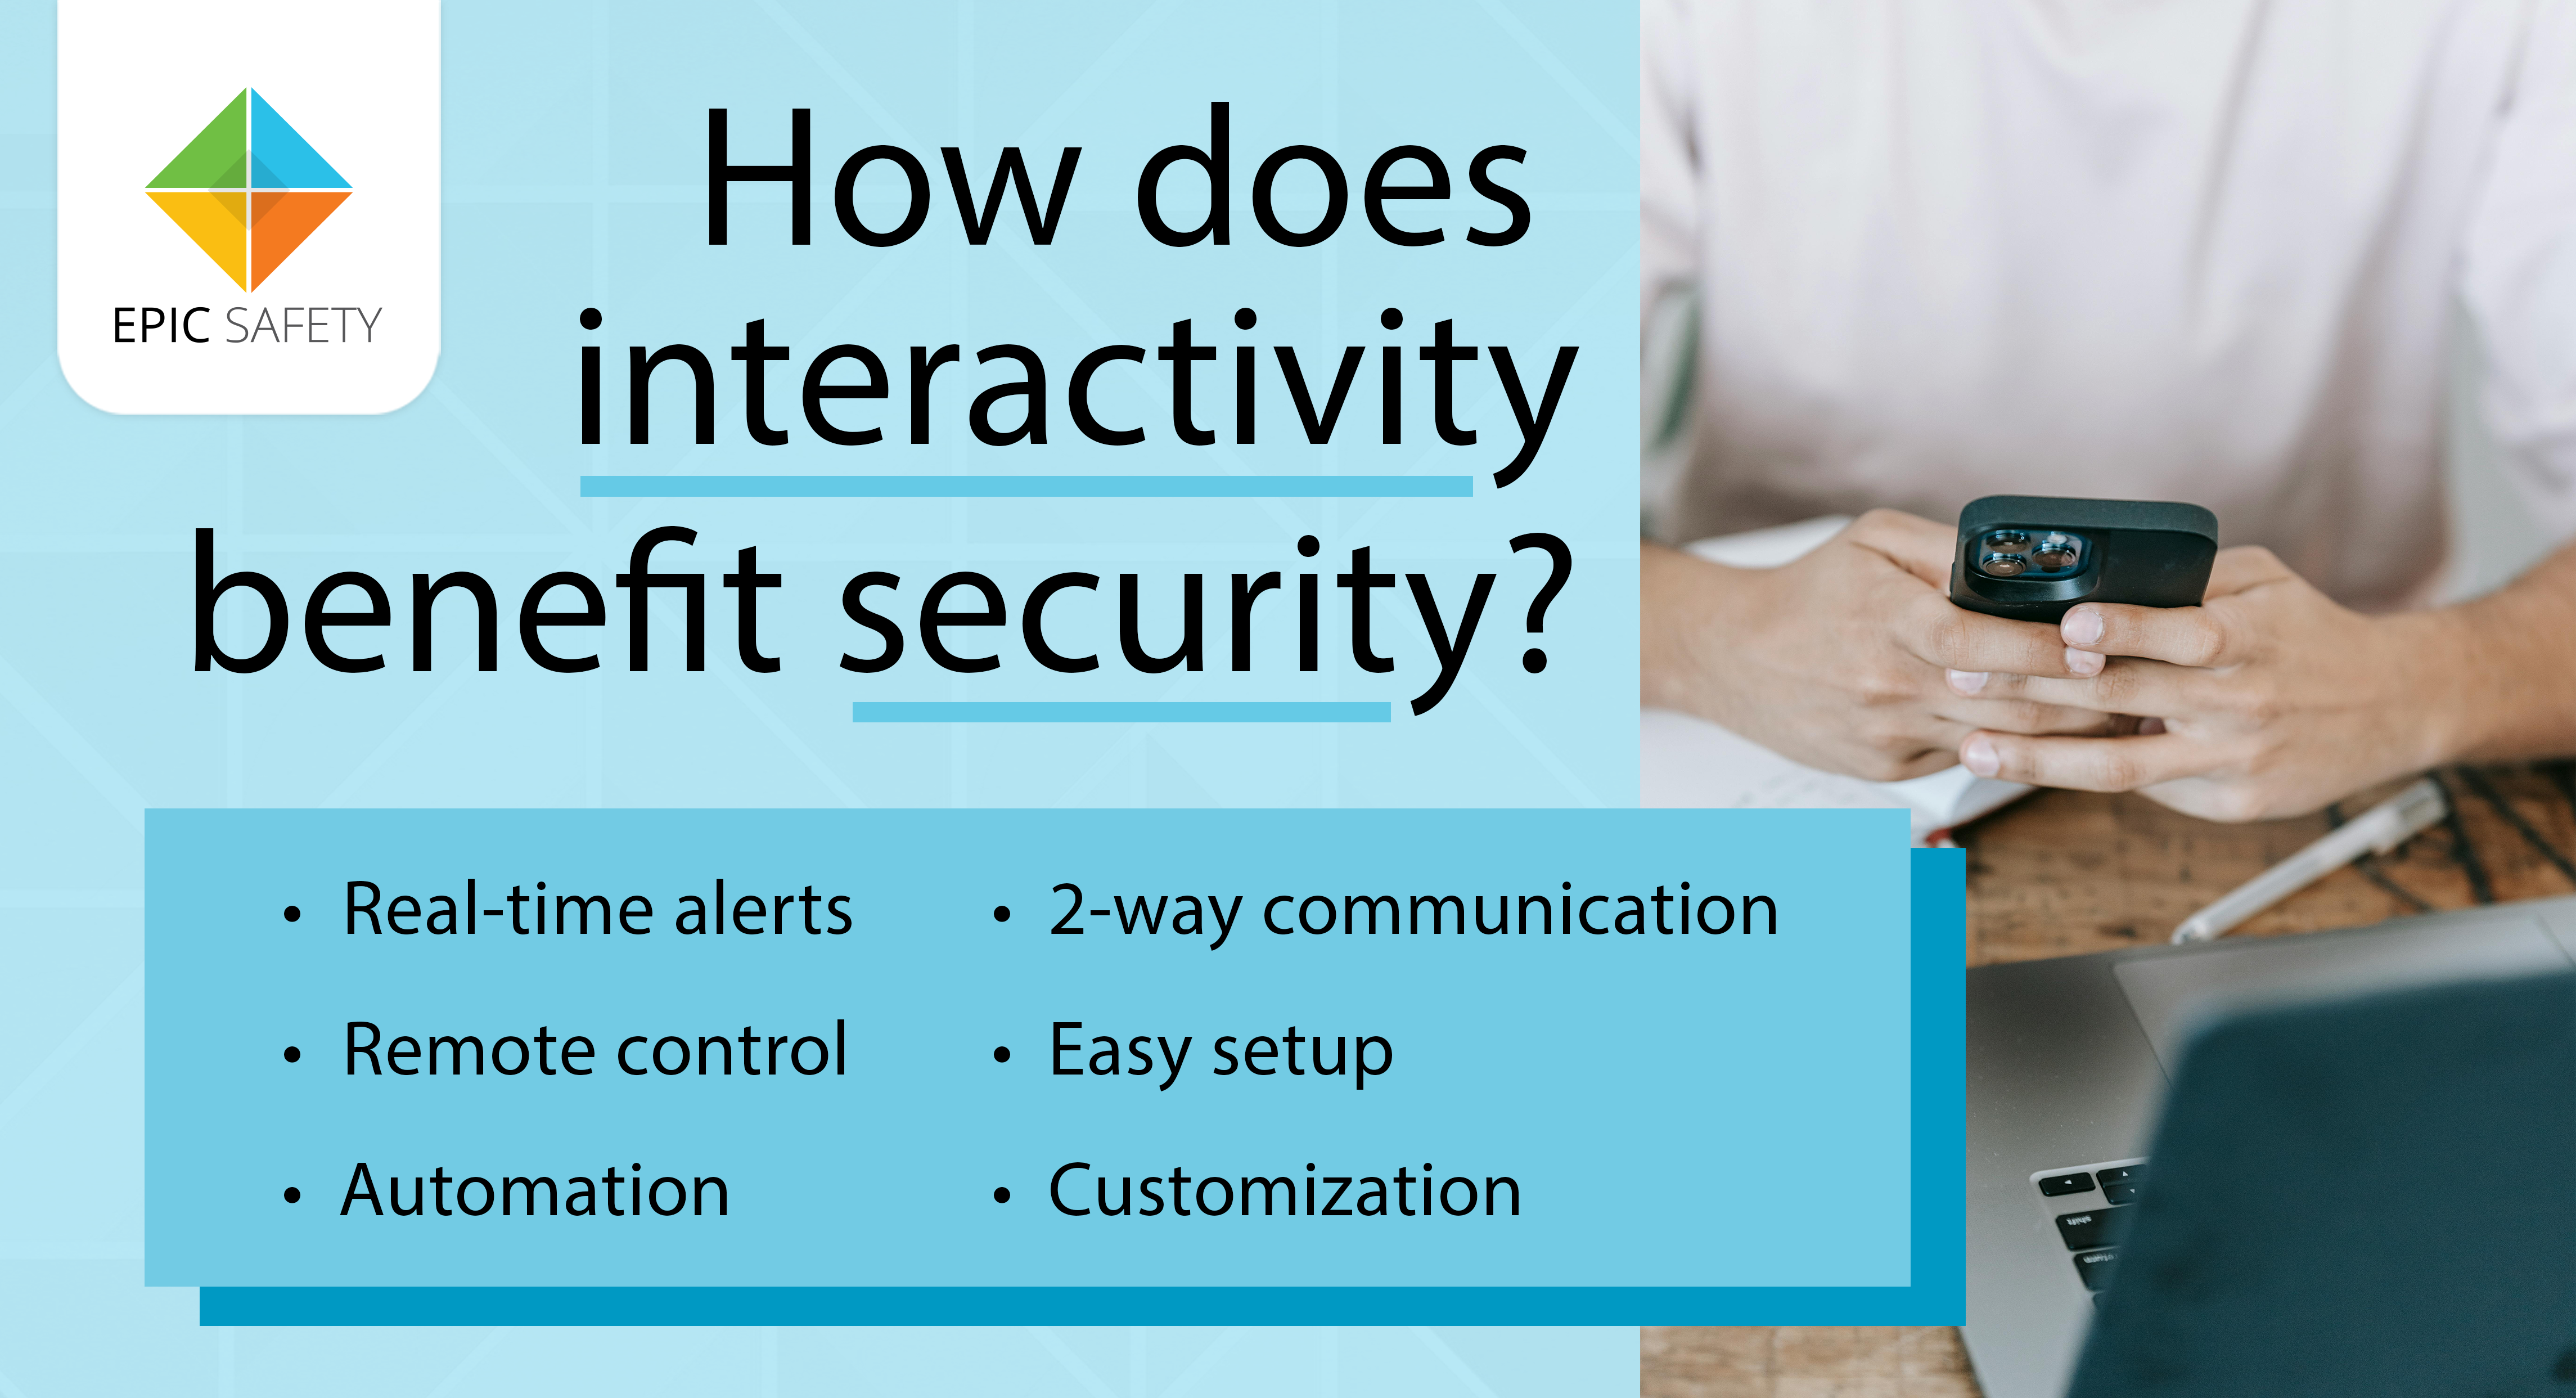 The Benefits of Interactivity in Modern Security Systems